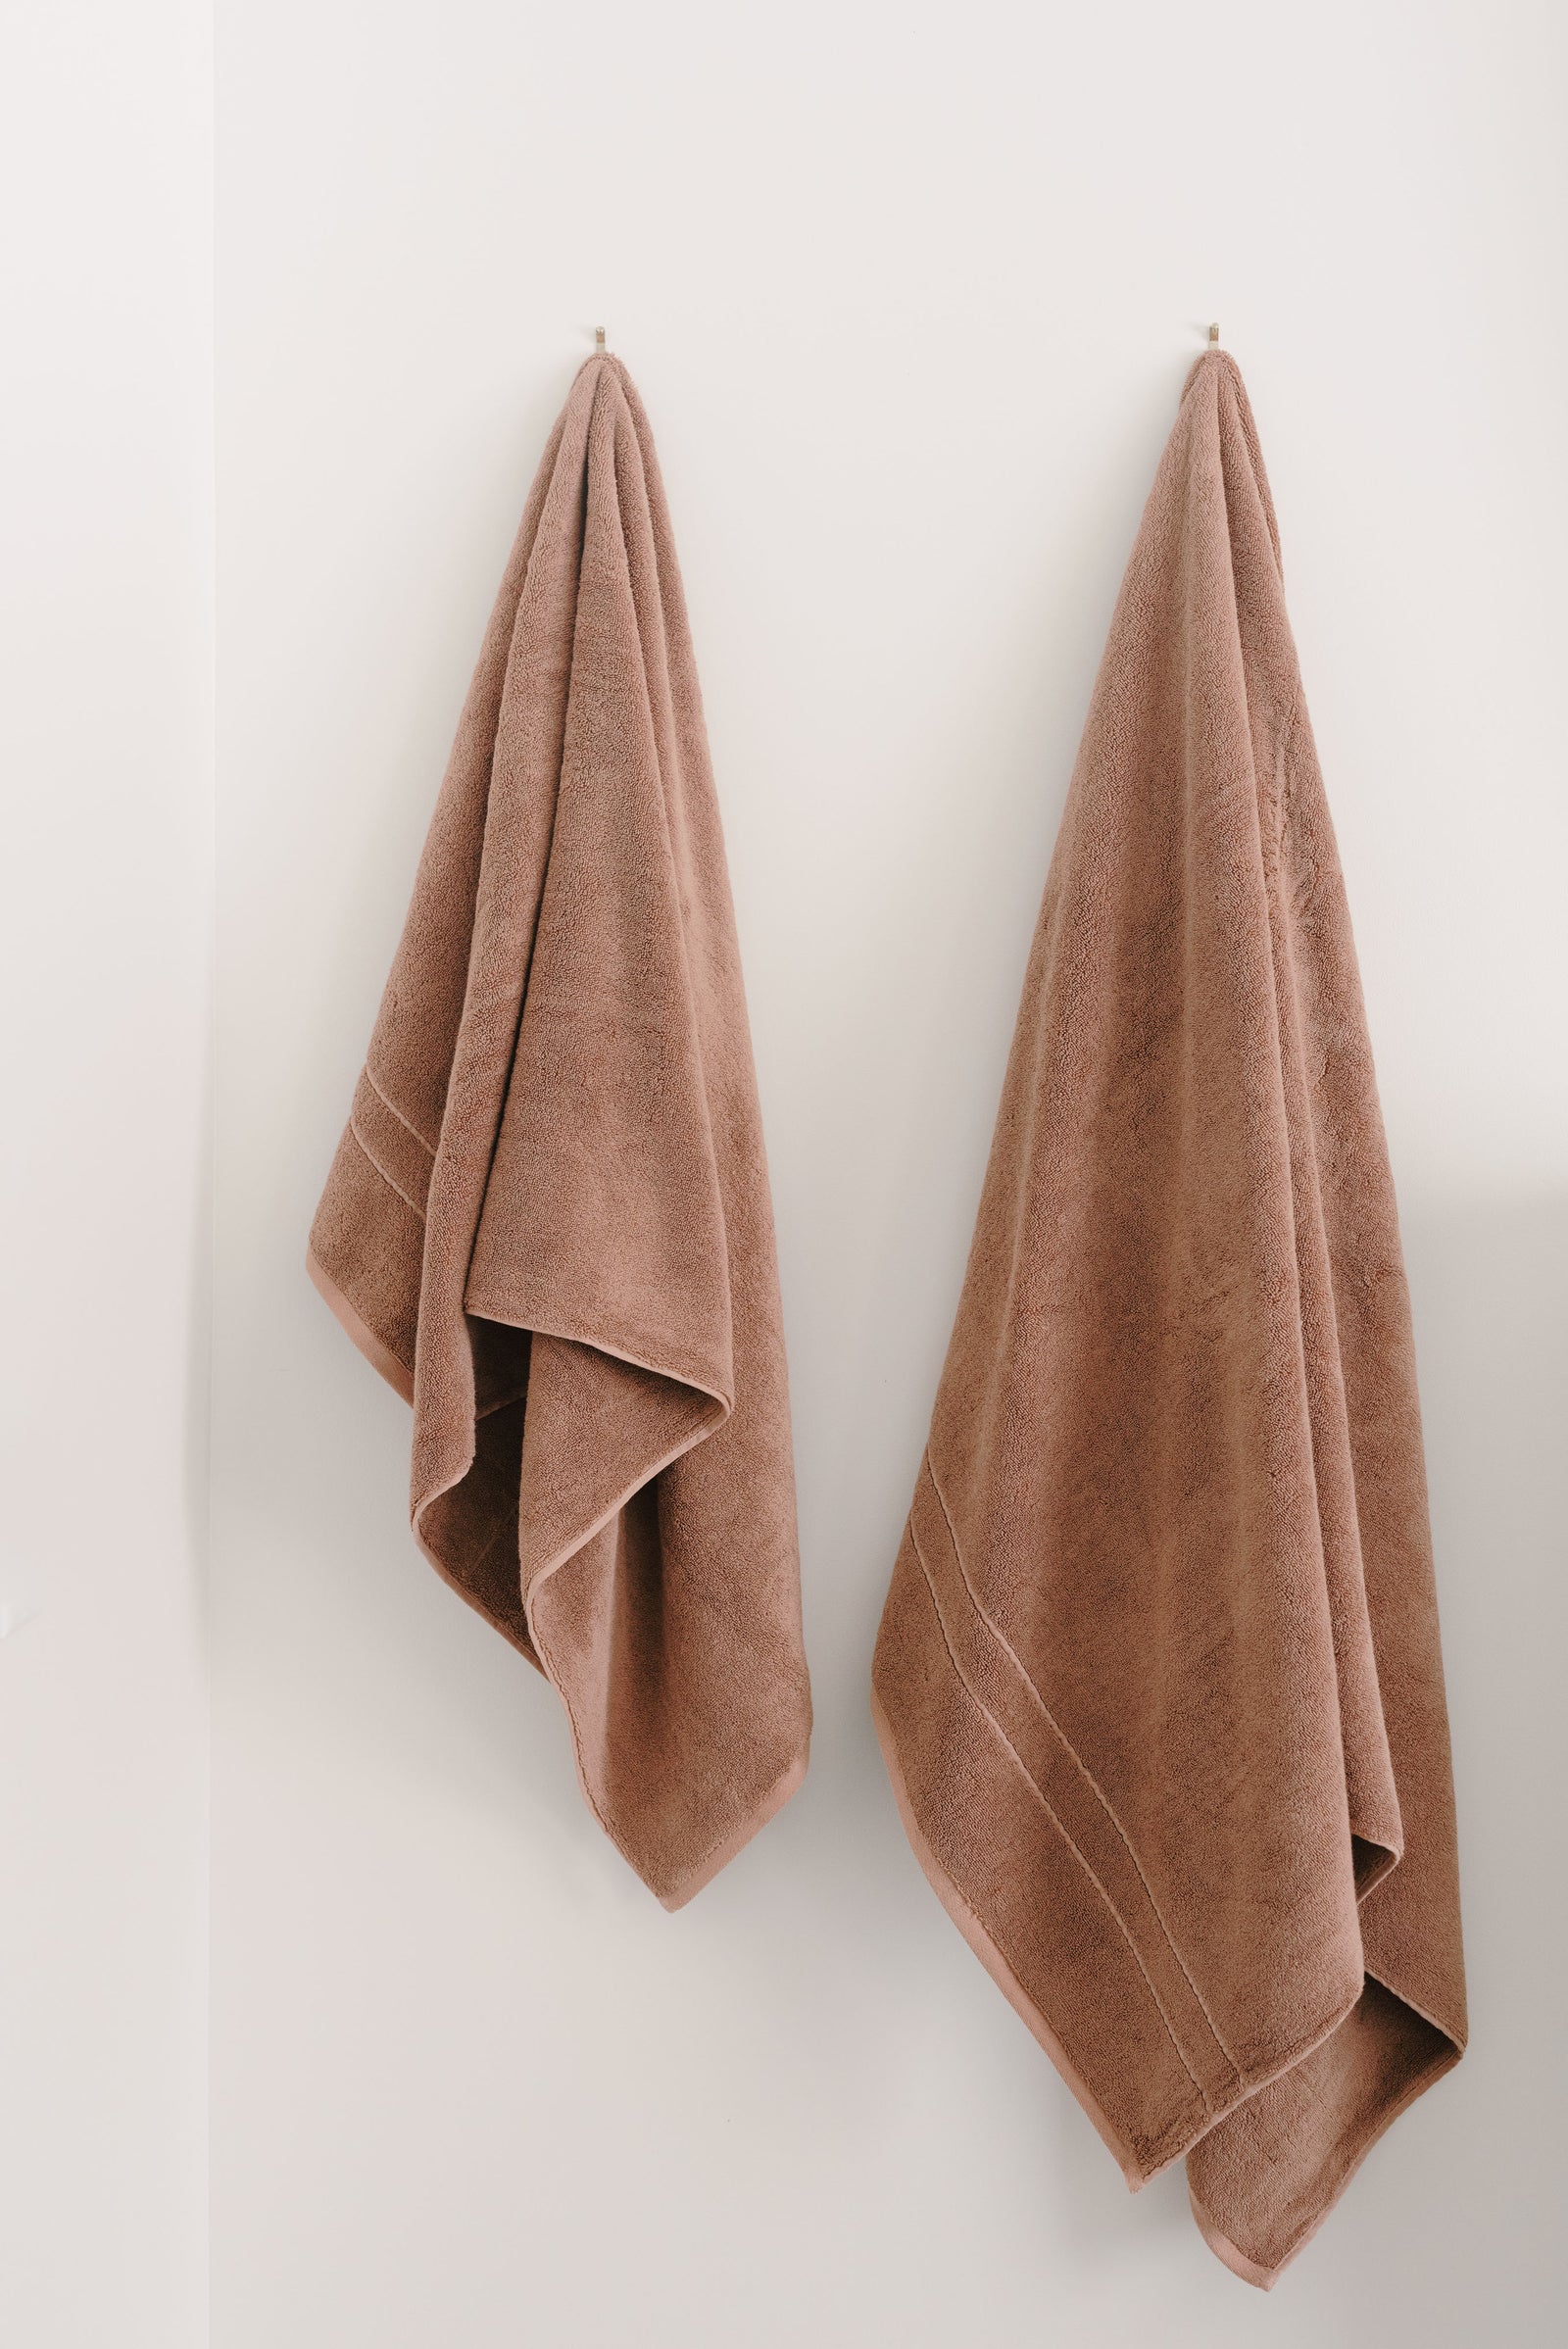 Premium Plush Bath Sheets in the color clay. Photo of Premium Plush Bath sheets/towels taken in a bathroom showing the towels which are hung from a towel rack. 